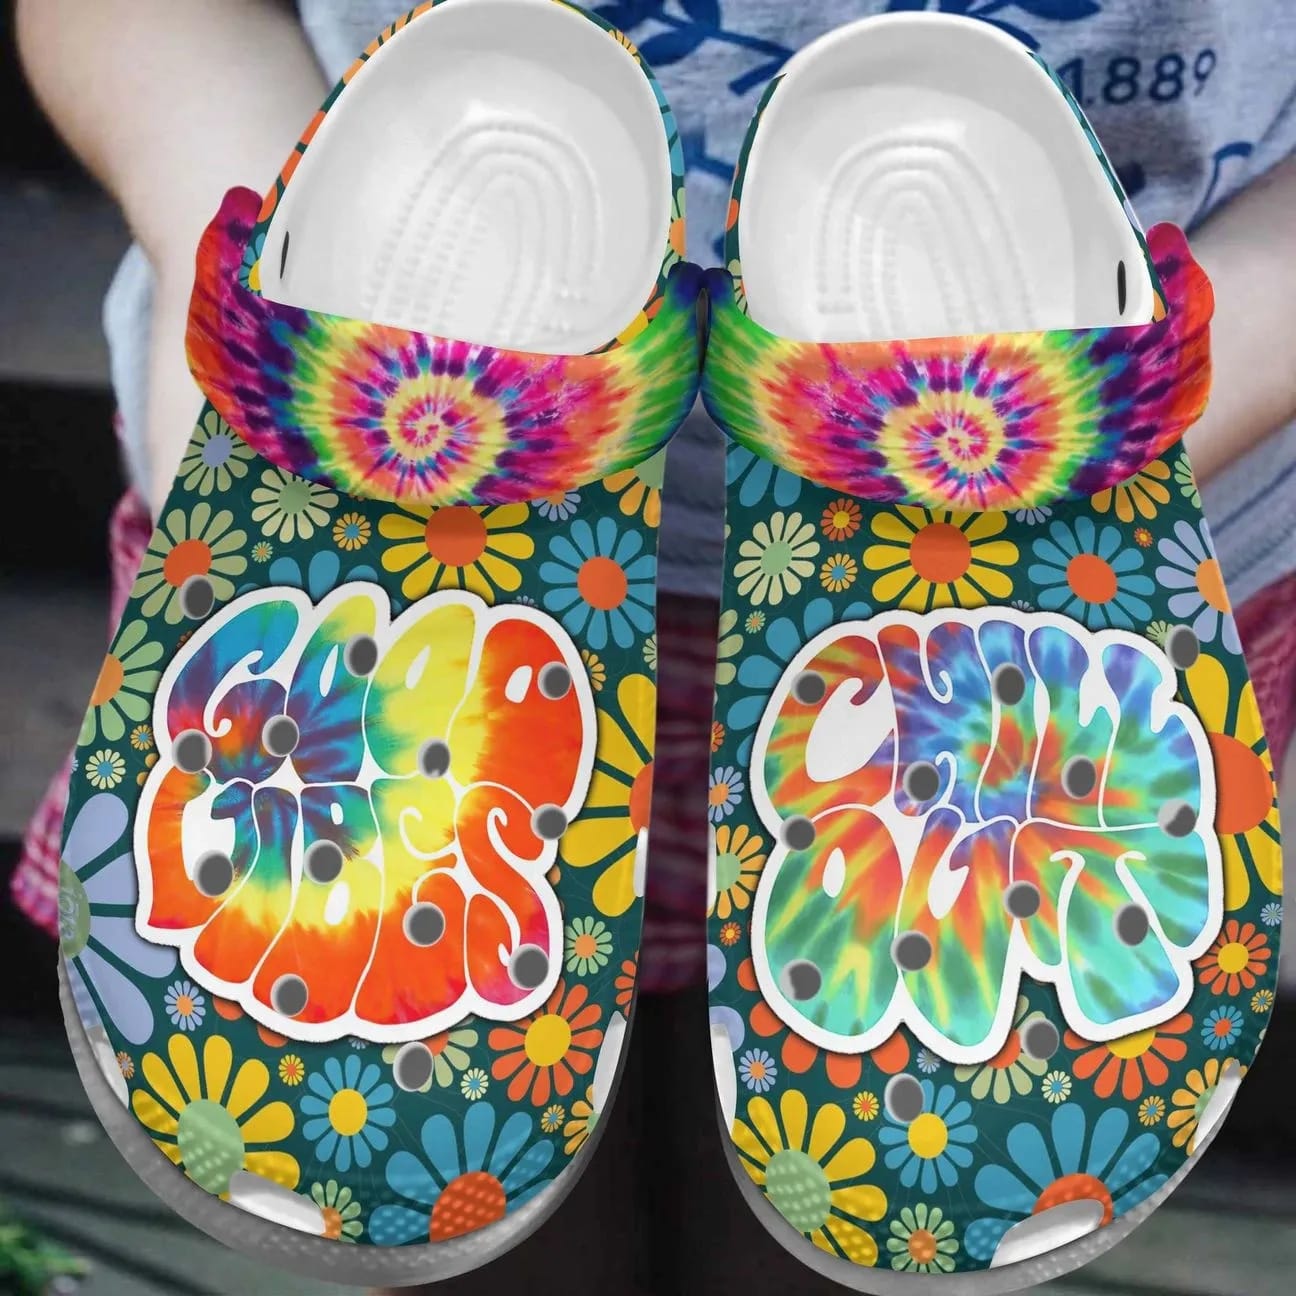 Hippie Crocs Comfortablefashion Style Comfortable For Women Men Good Vibes Chill Out B4zf2i